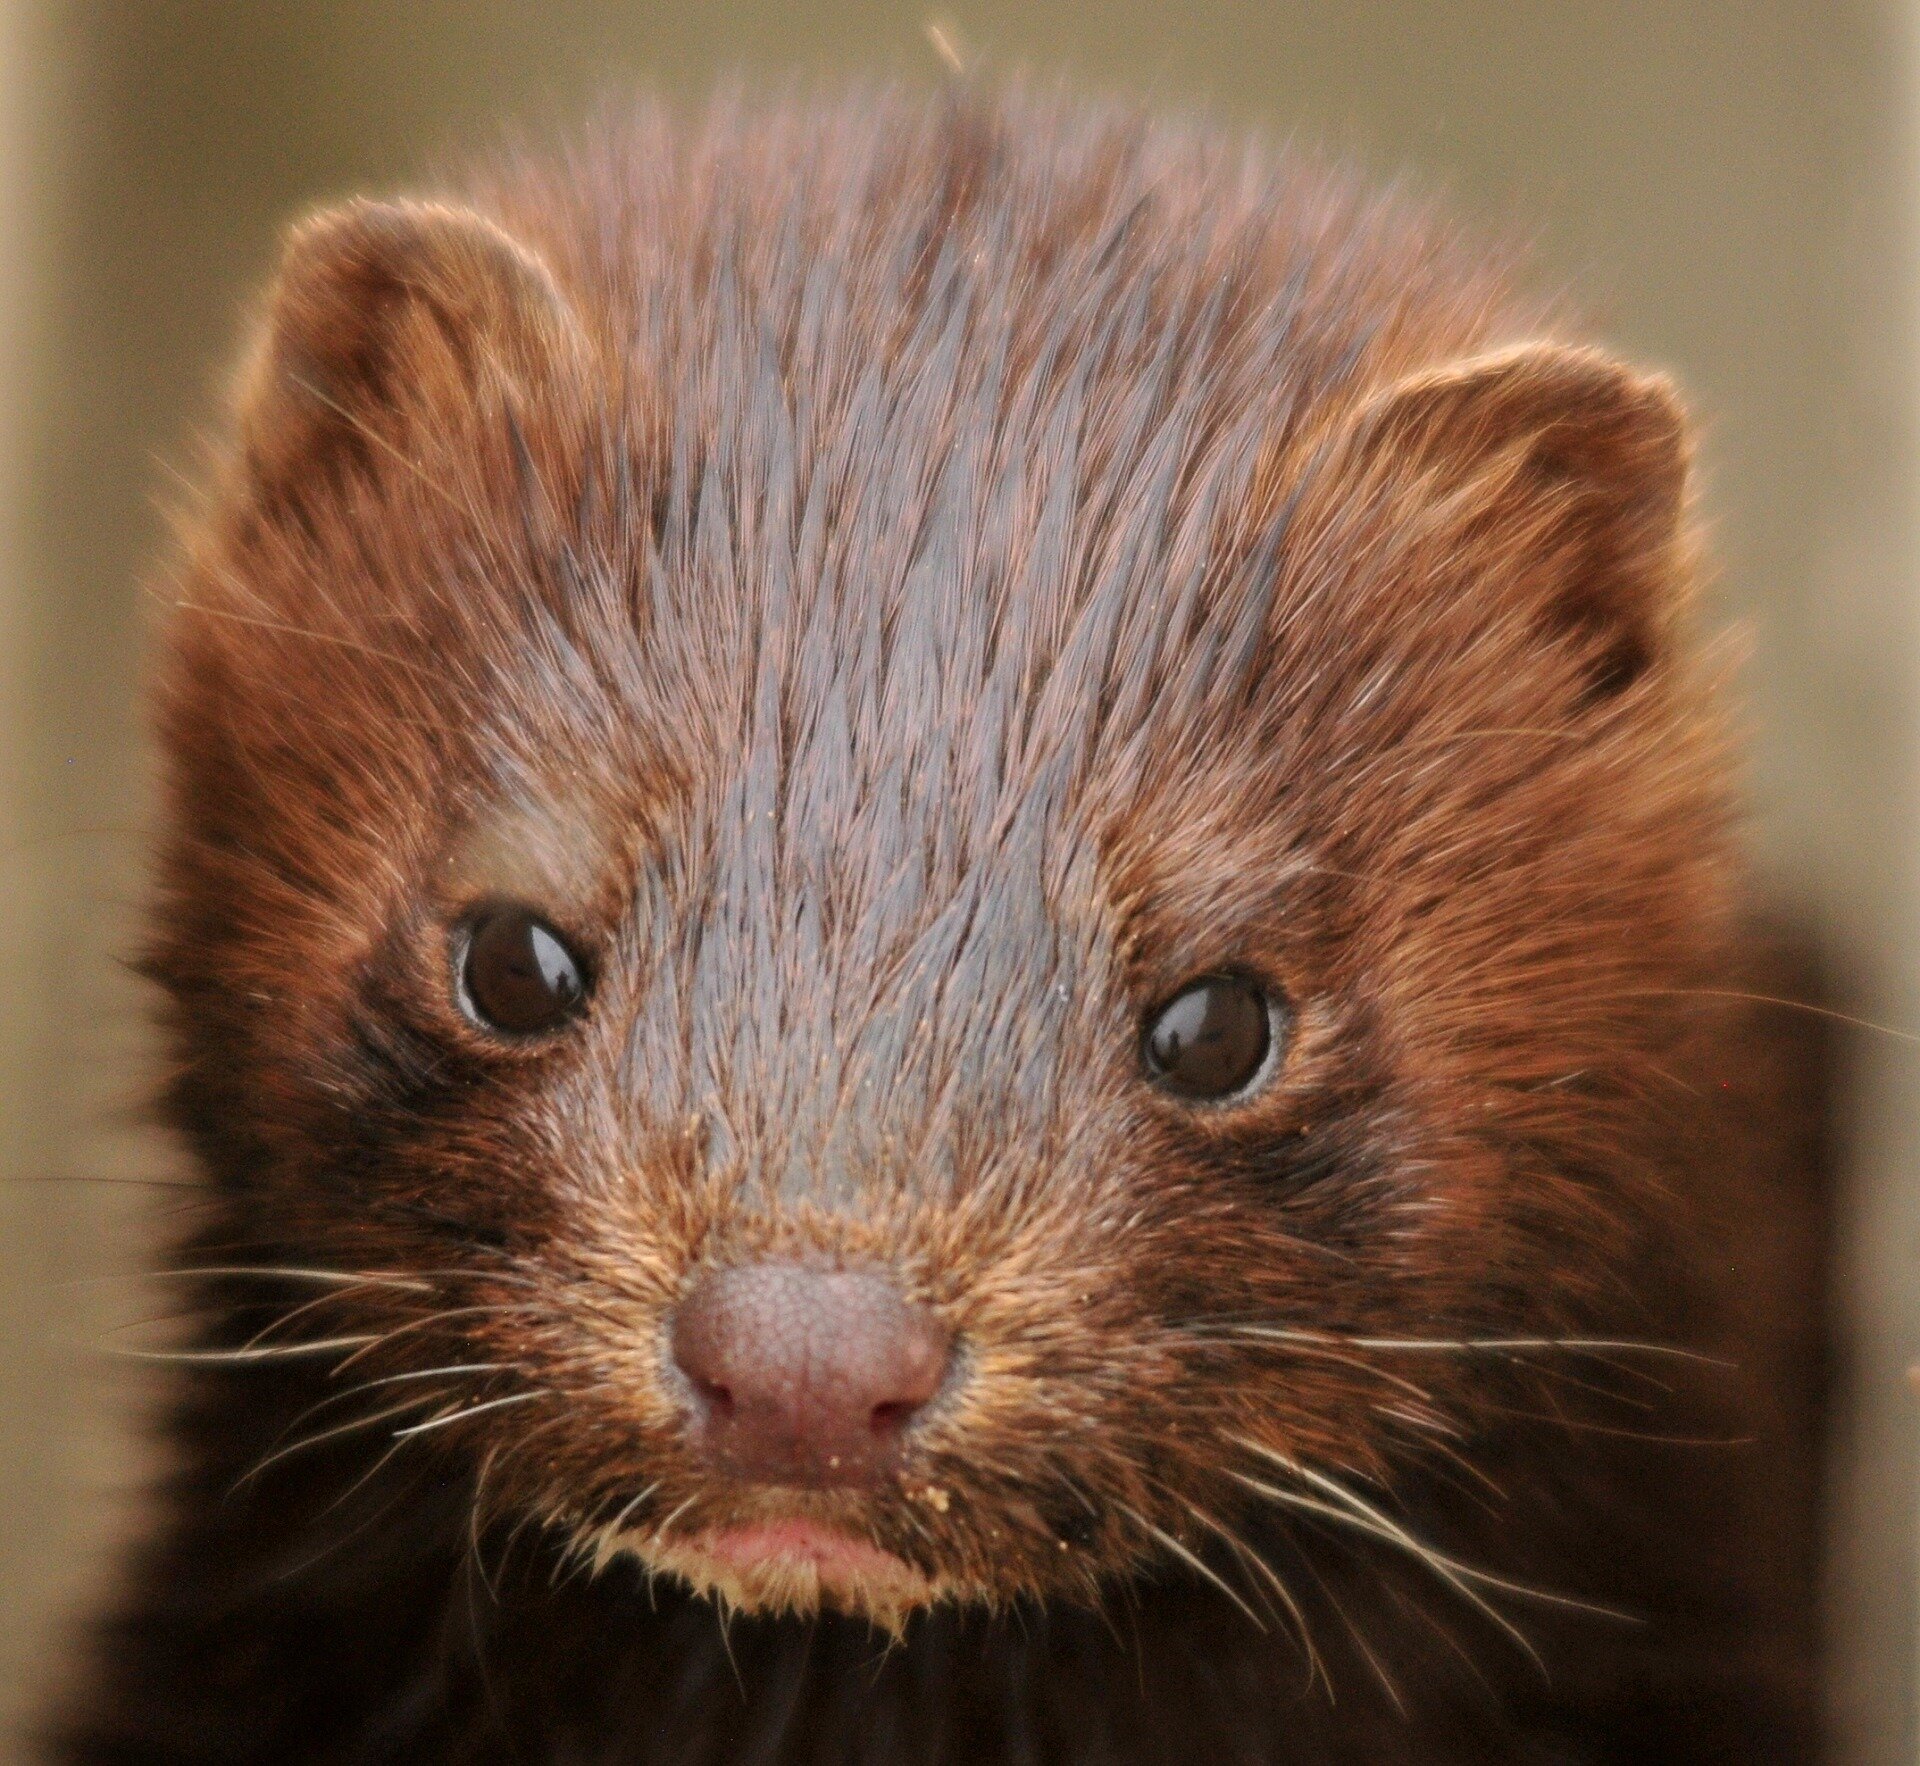 Dutch mink workers may be first known humans infected by animals: WHO